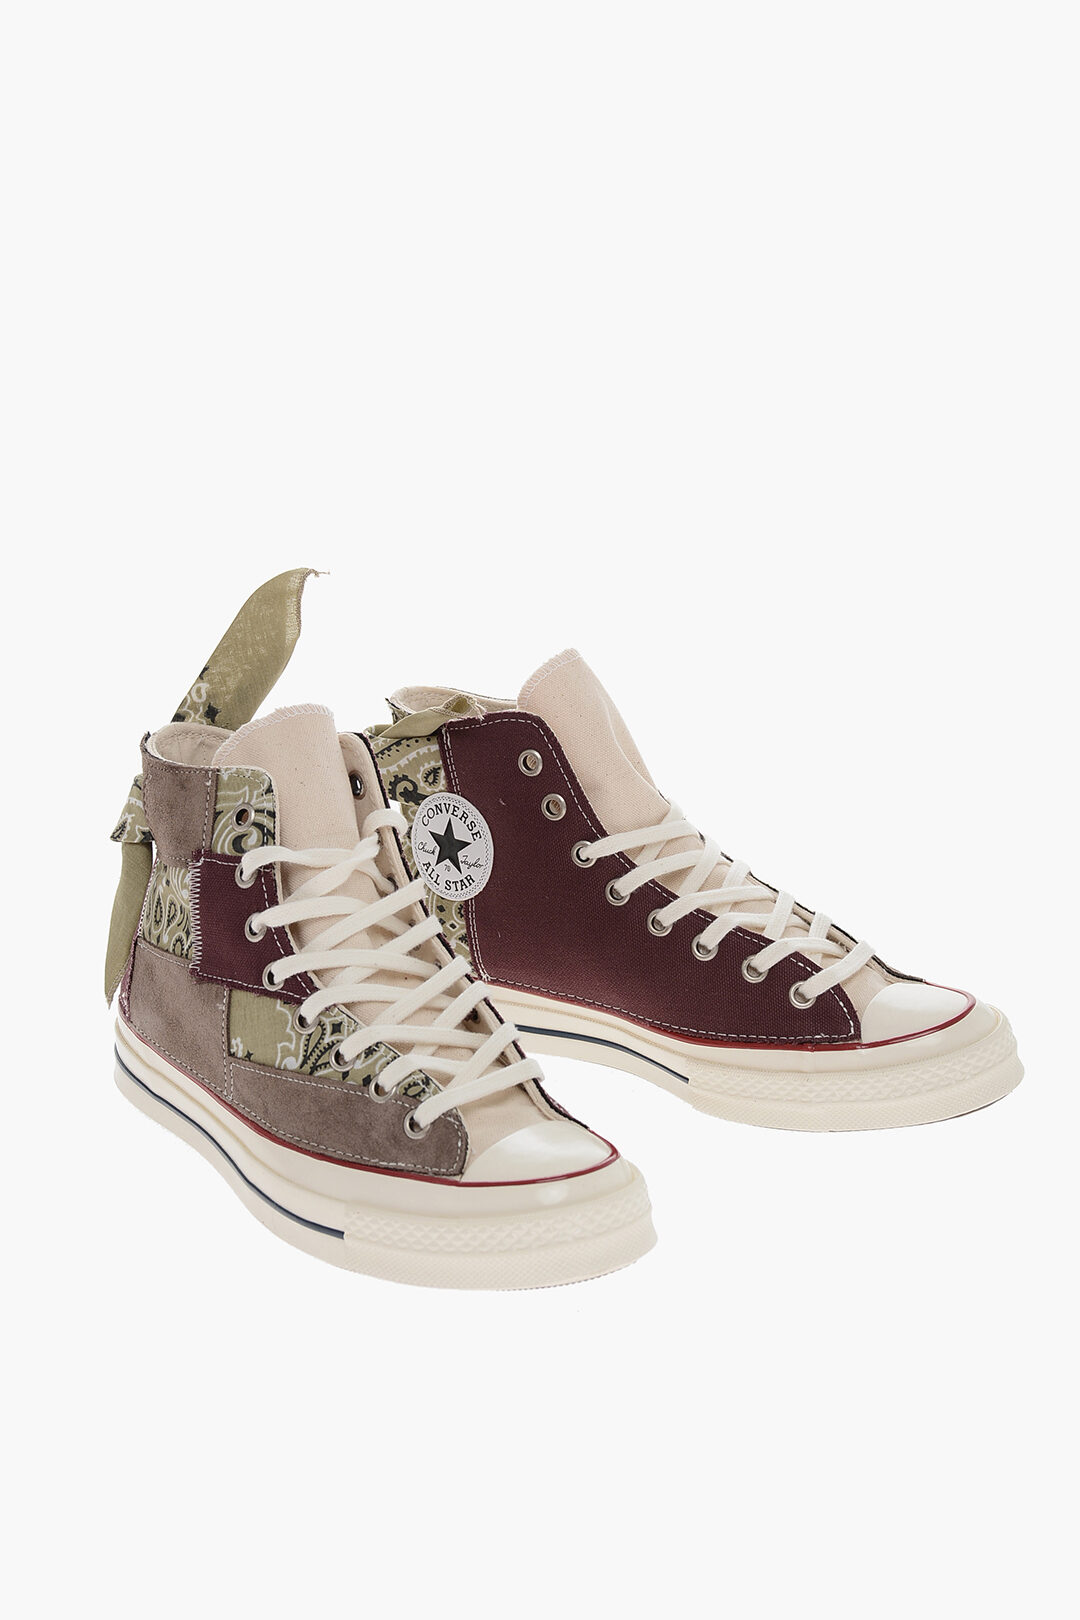 Converse ALL STAR CHUCK TAYLOR Patchwork 70' High-Top with Suede Details men women Glamood Outlet